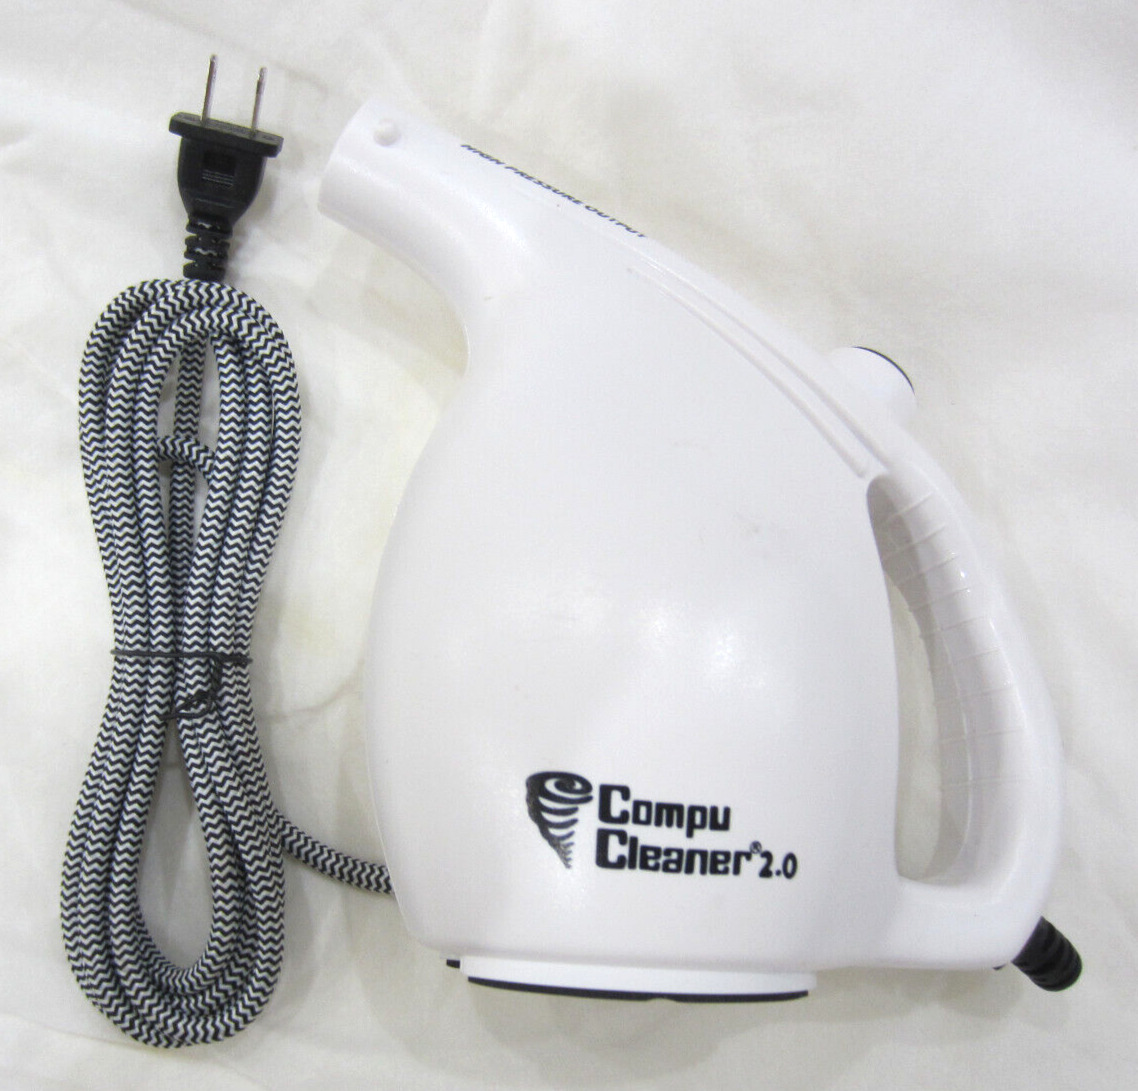 Easygo Compucleaner 2.0 Electric High Pressure Air Duster Computer Cleaner